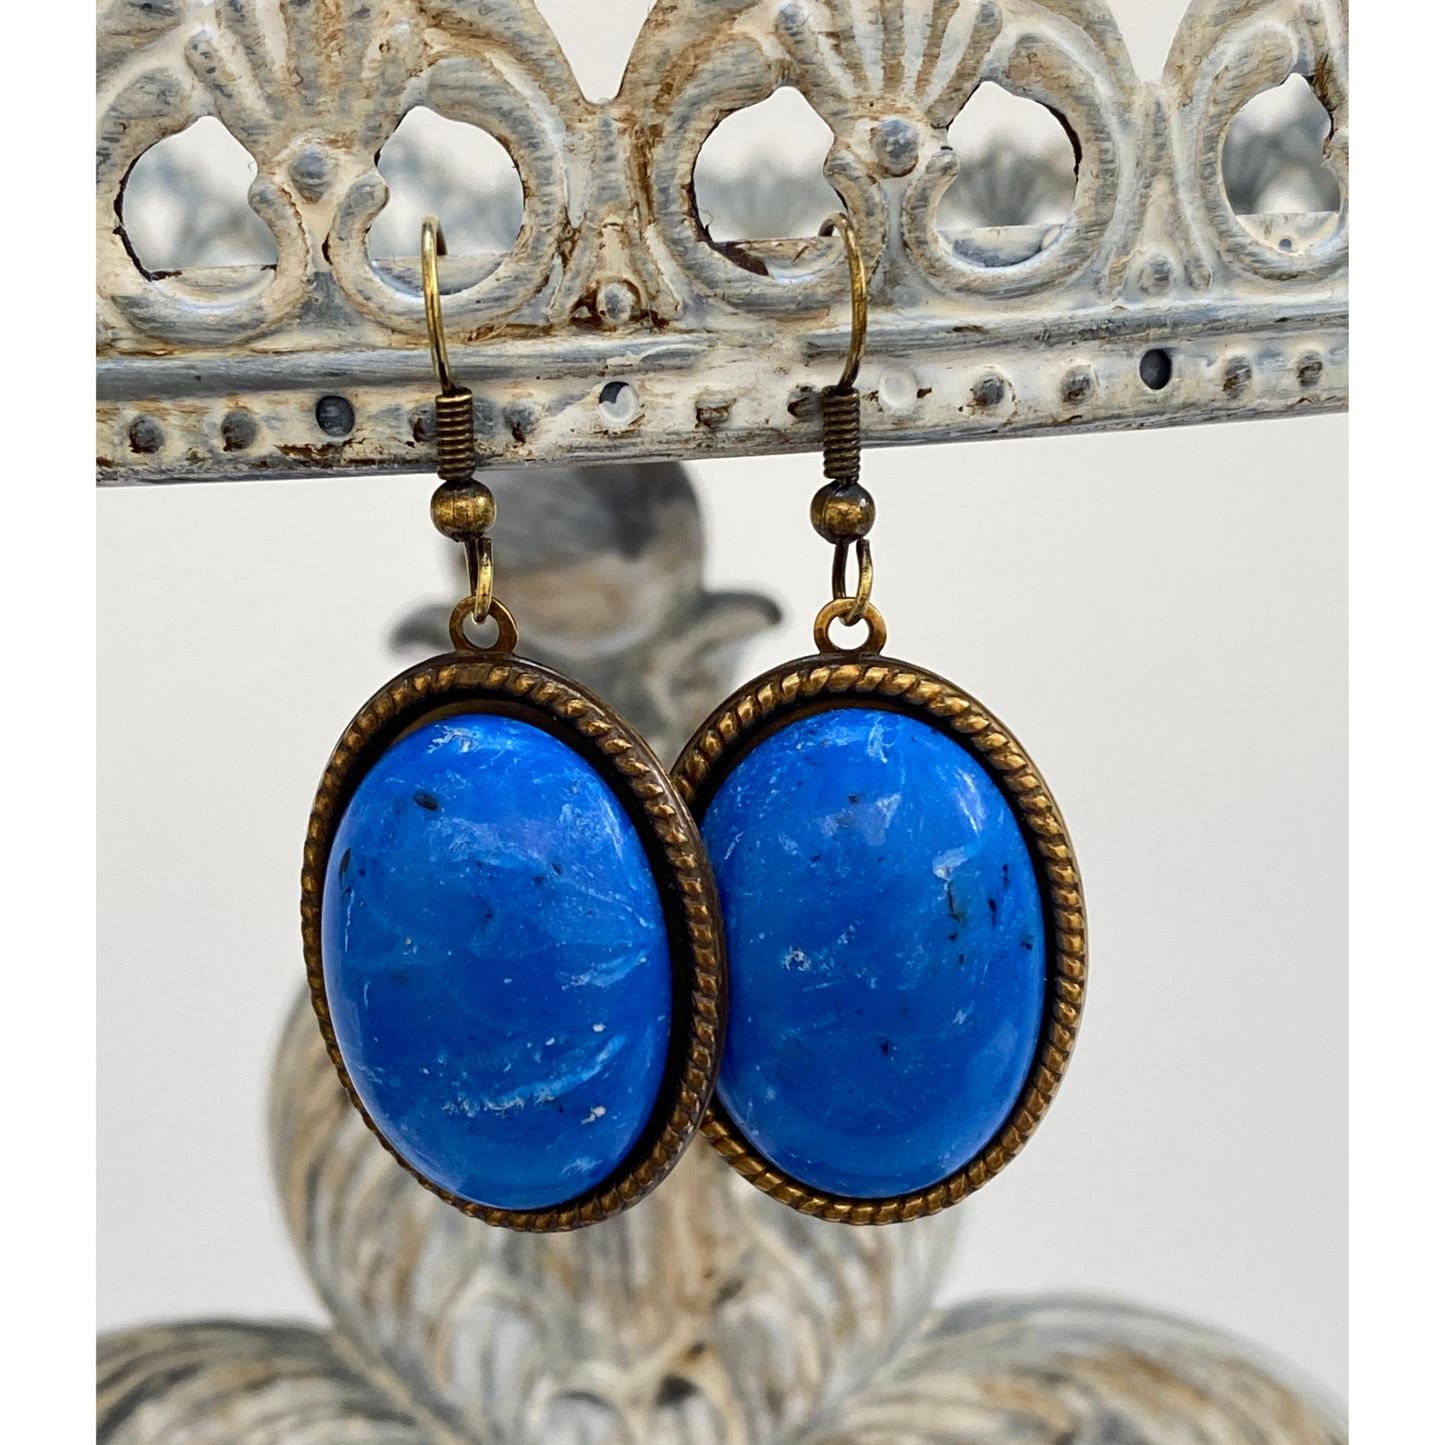 Earring, Classic Blue, Oval Cabochon, Antique Gold French Ear Wire, Handmade in USA